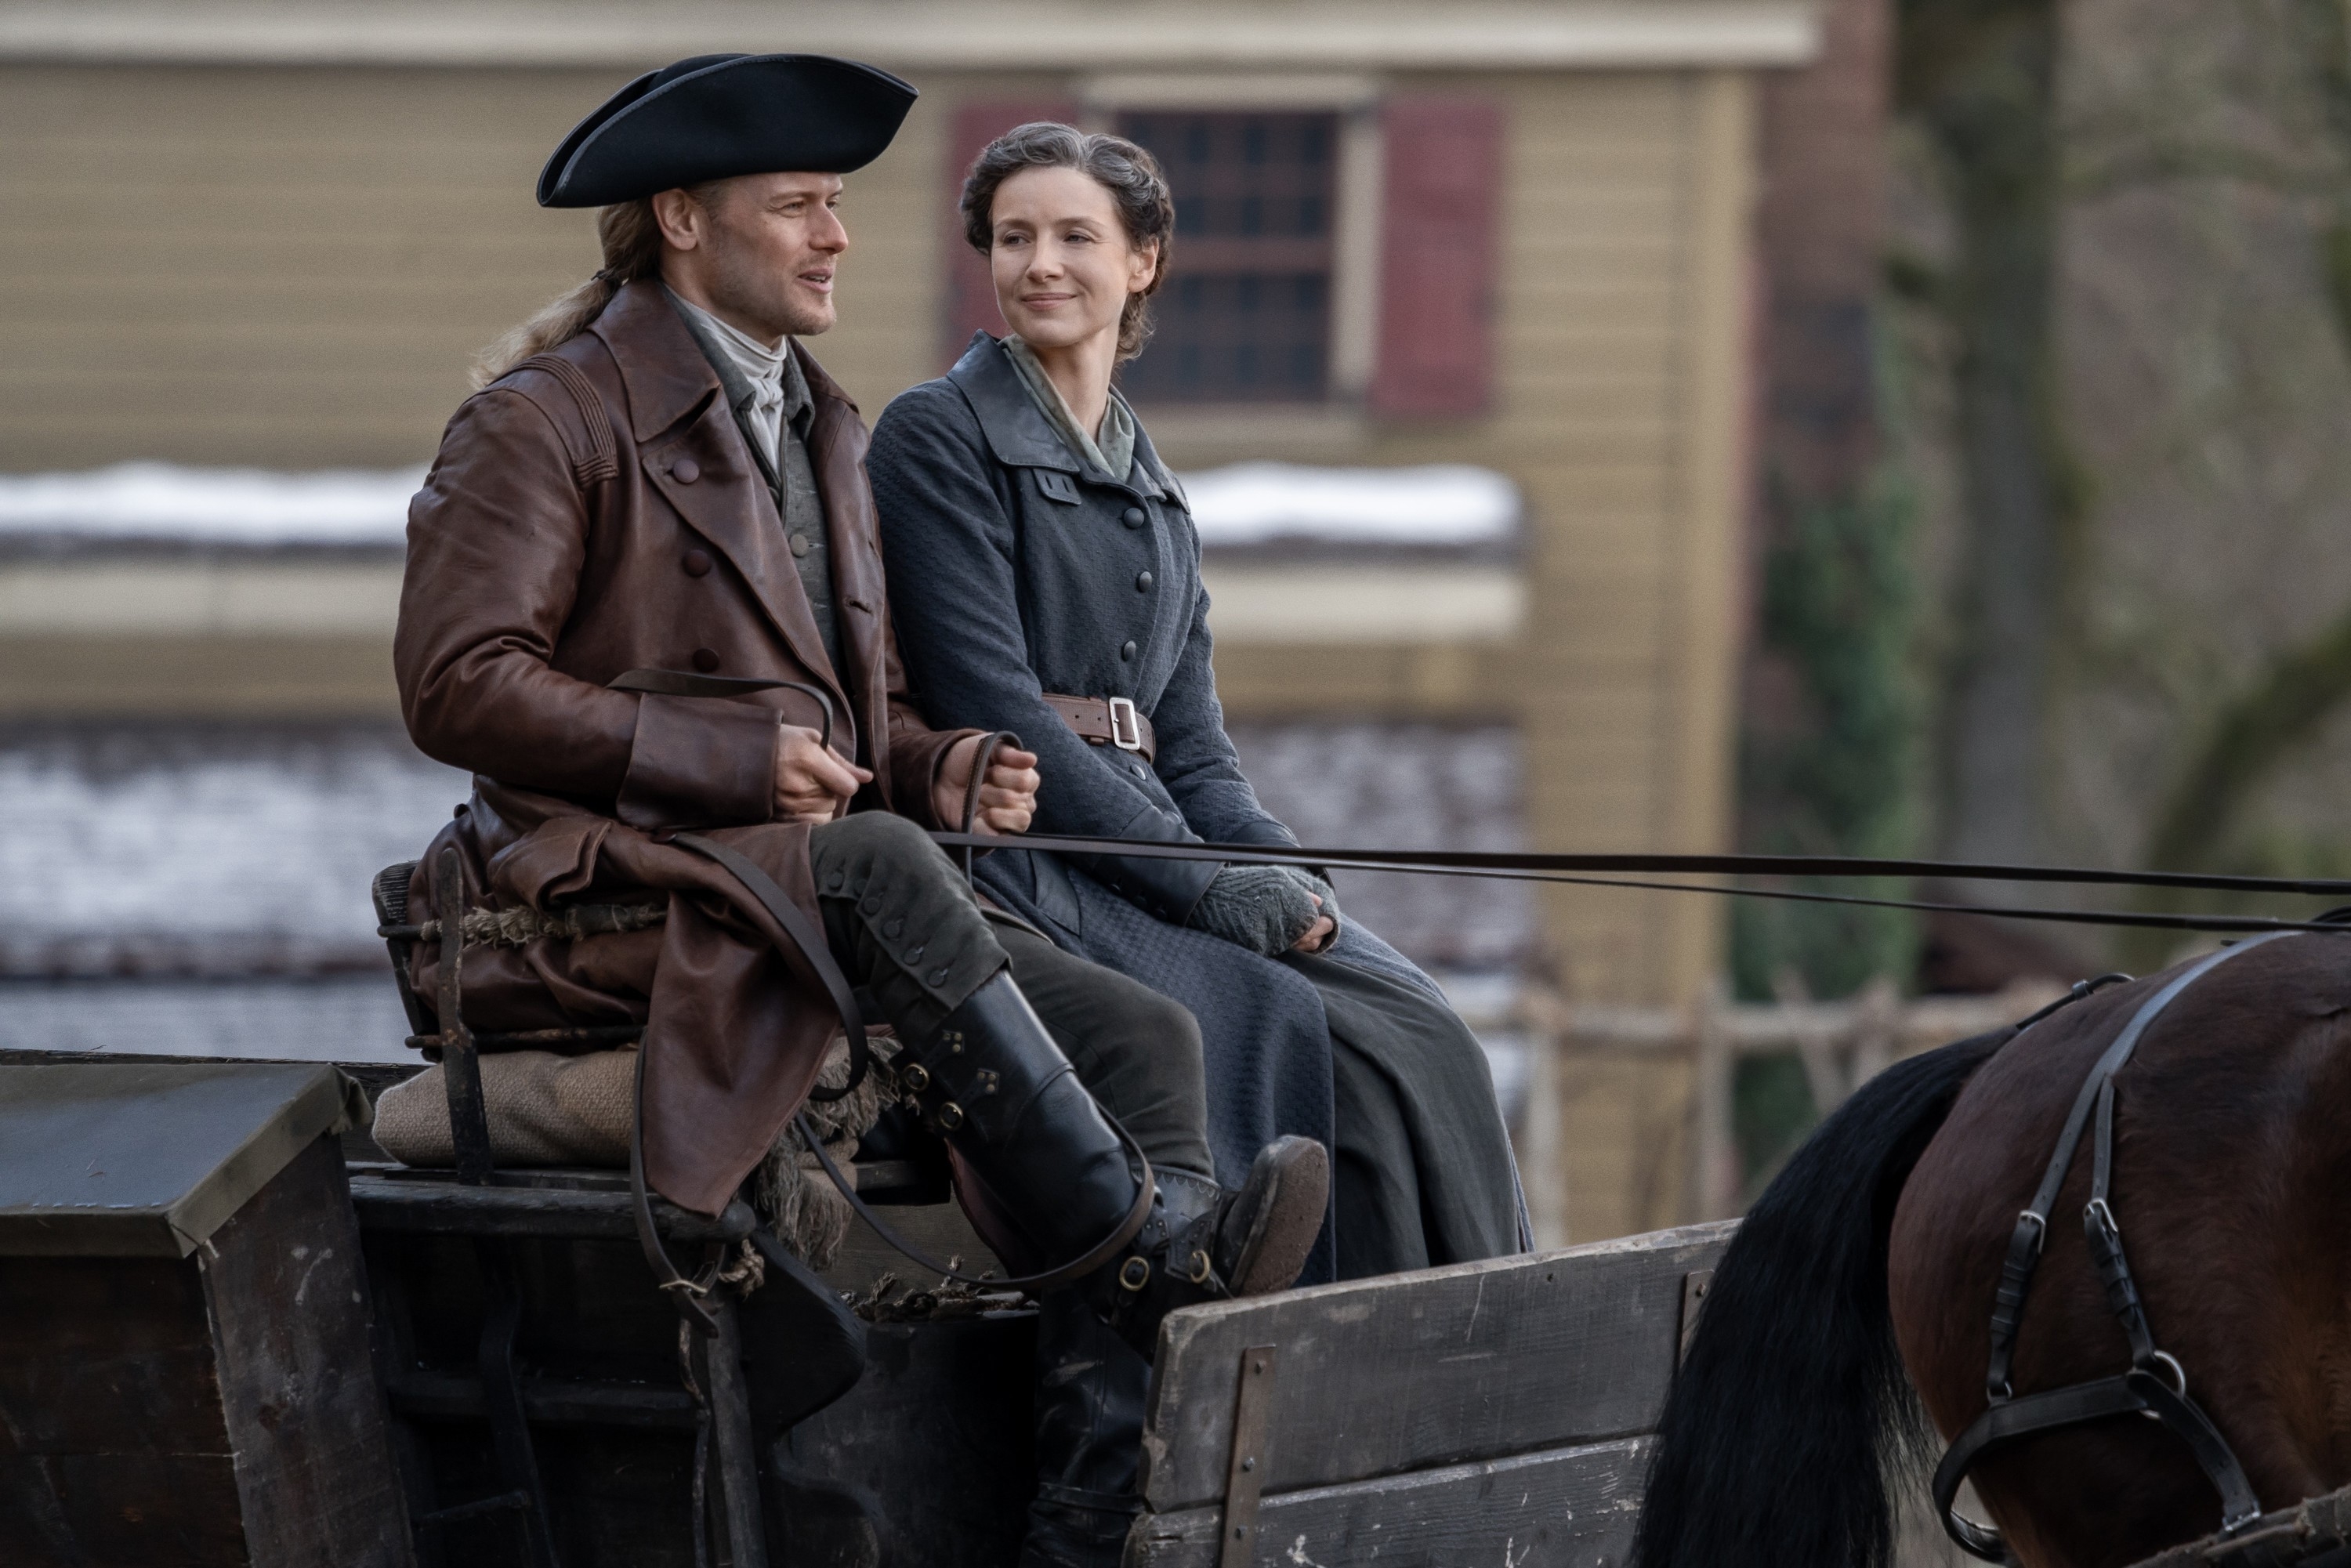 Jamie and Claire are sitting in a horse-drawn carriage, dressed in period costumes